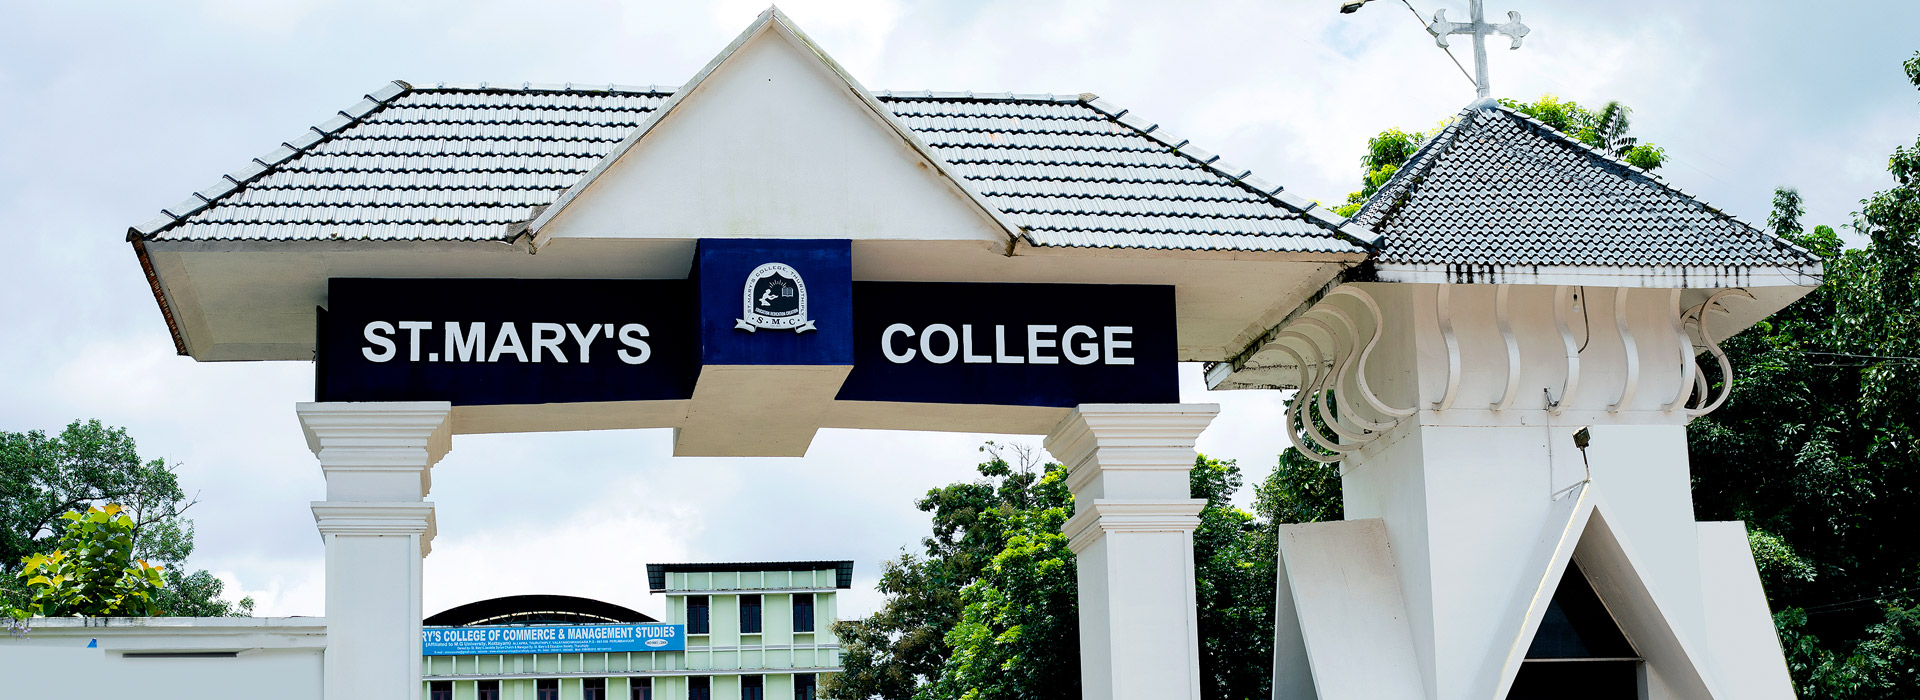 St. Mary's College of Commerce and Management Studies, Ernakulam Image